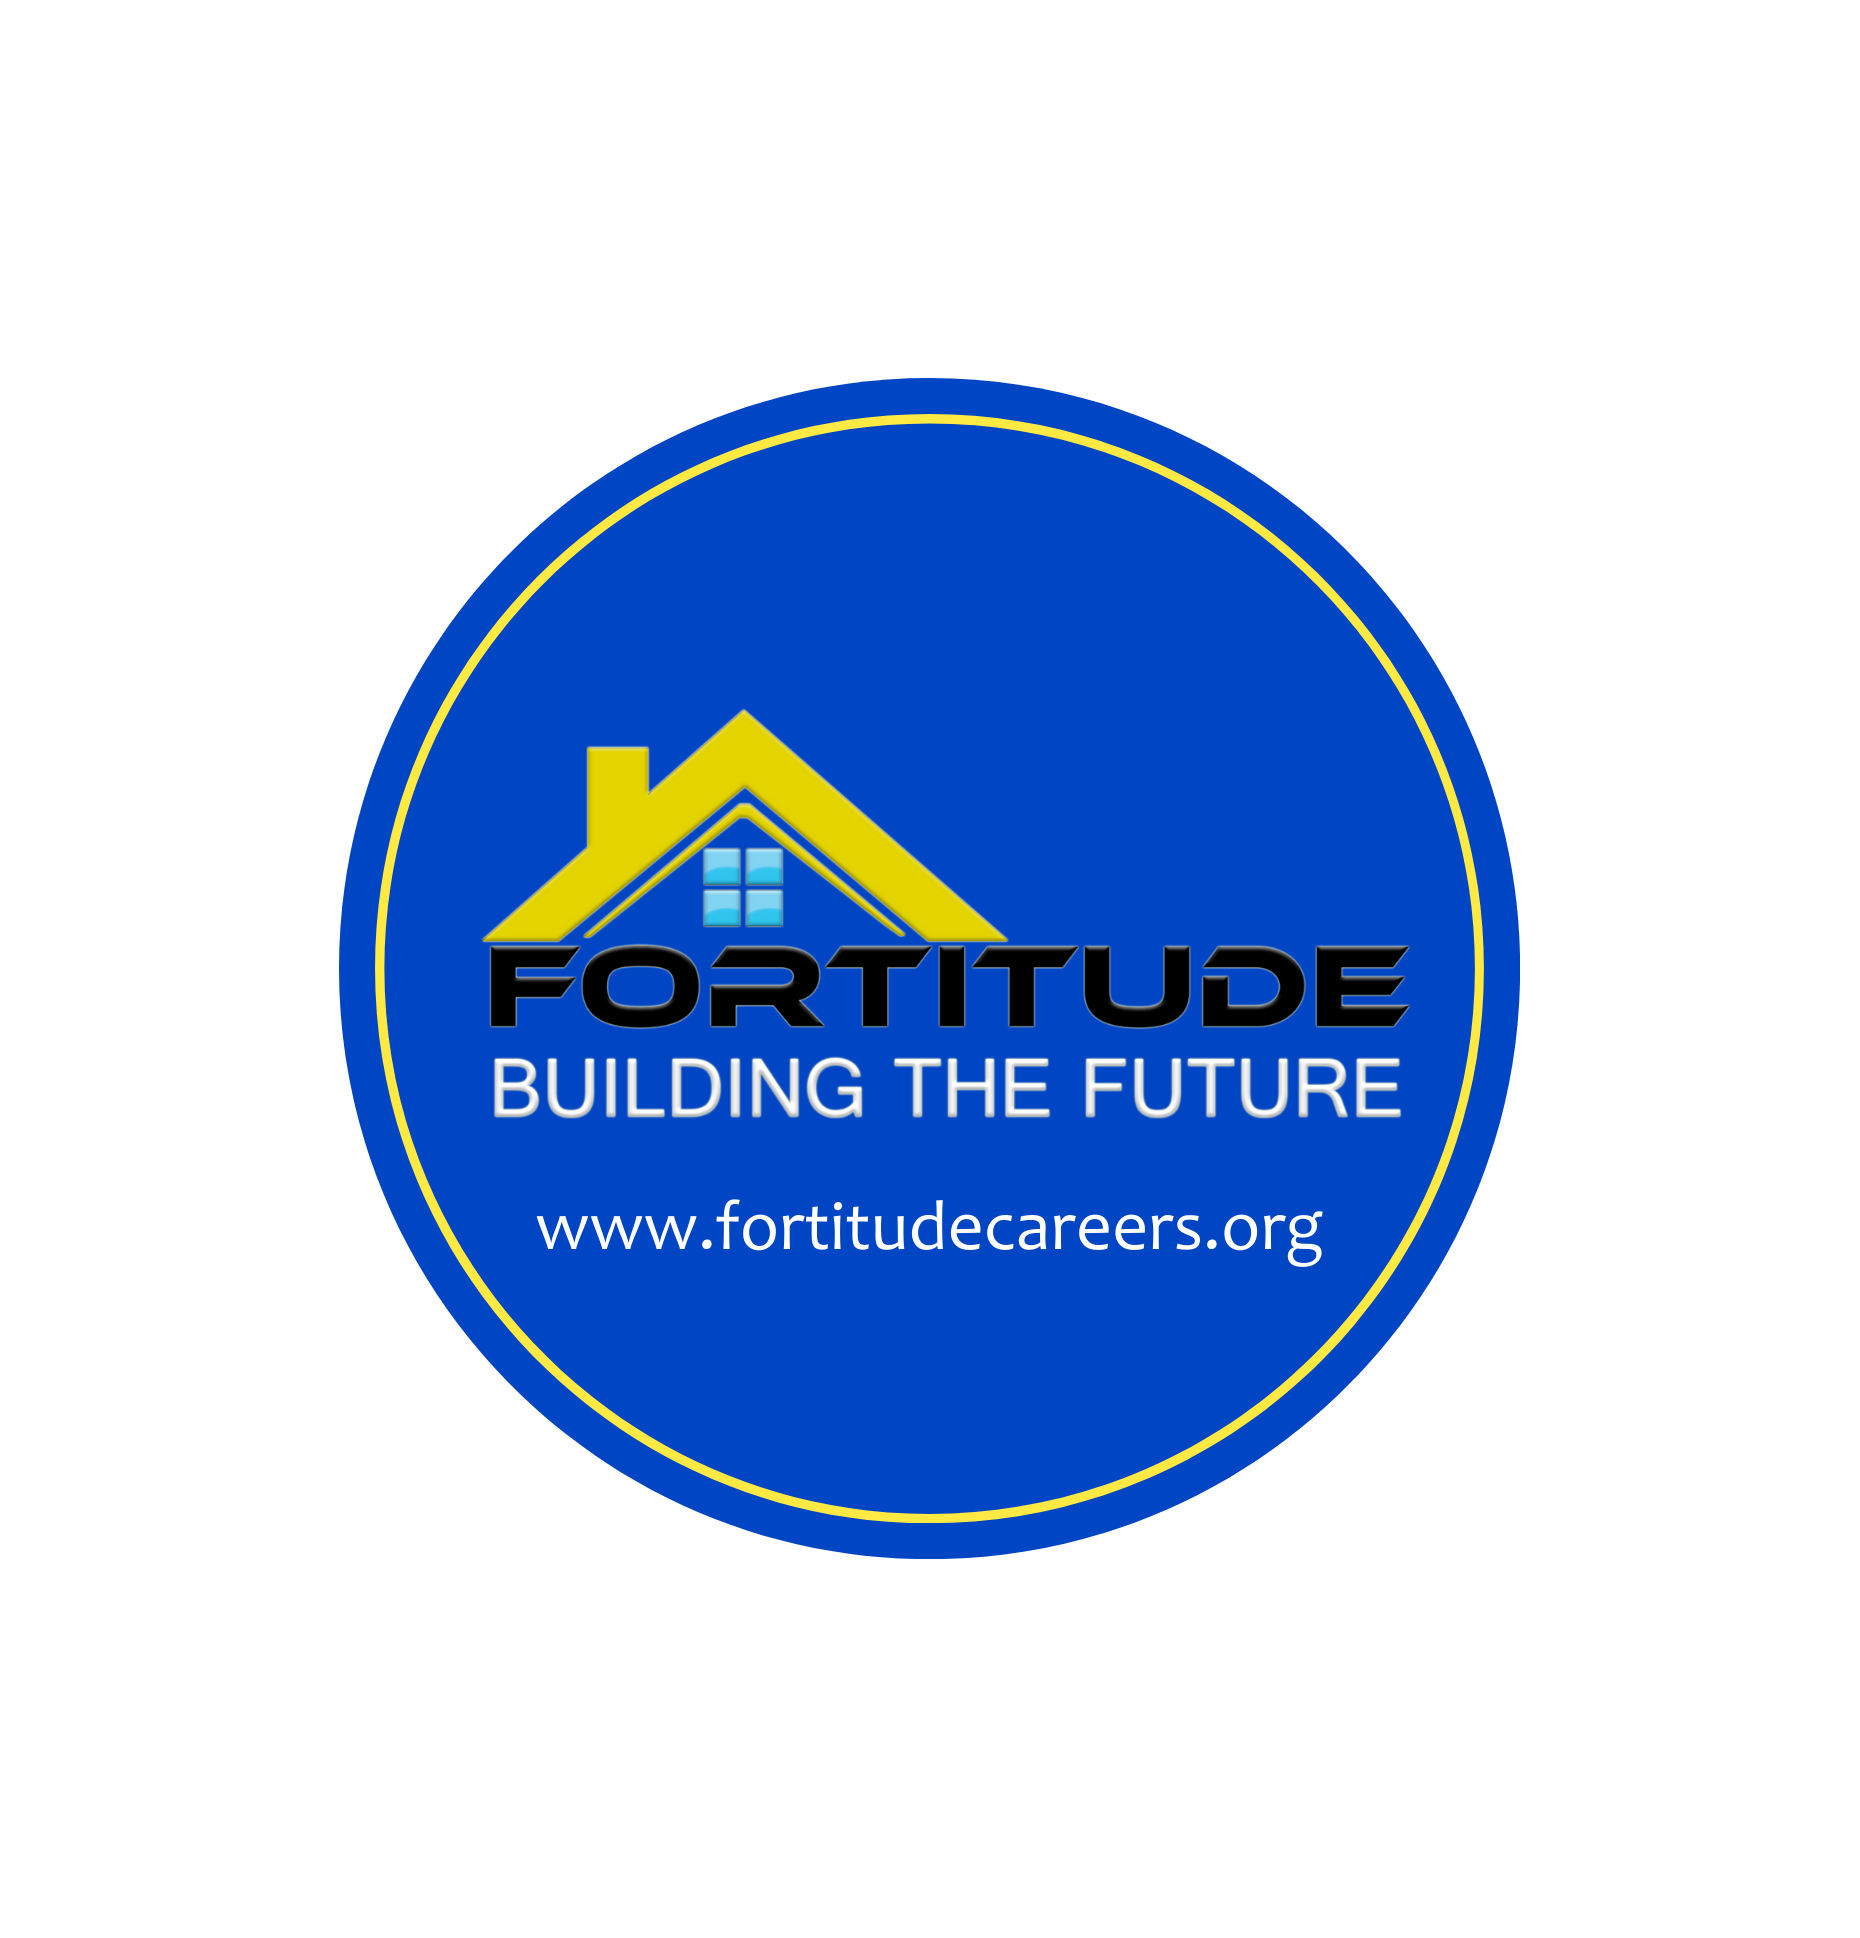 A Life-Changing Opportunity - Fortitude Careers